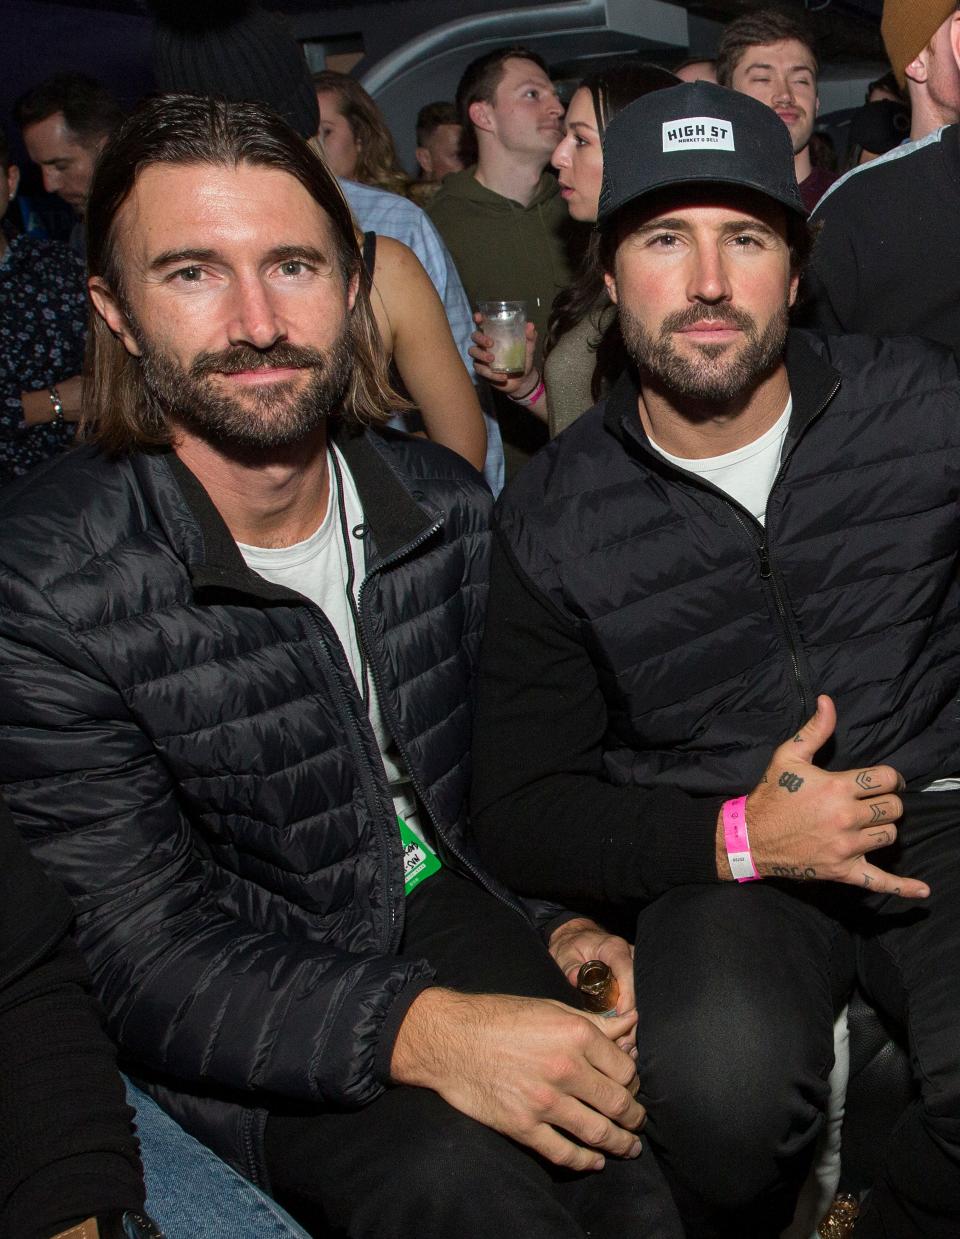 Brandon Jenner, pictured left, with brother Brody Jenner is expecting his fourth child and third with wife Cayley.